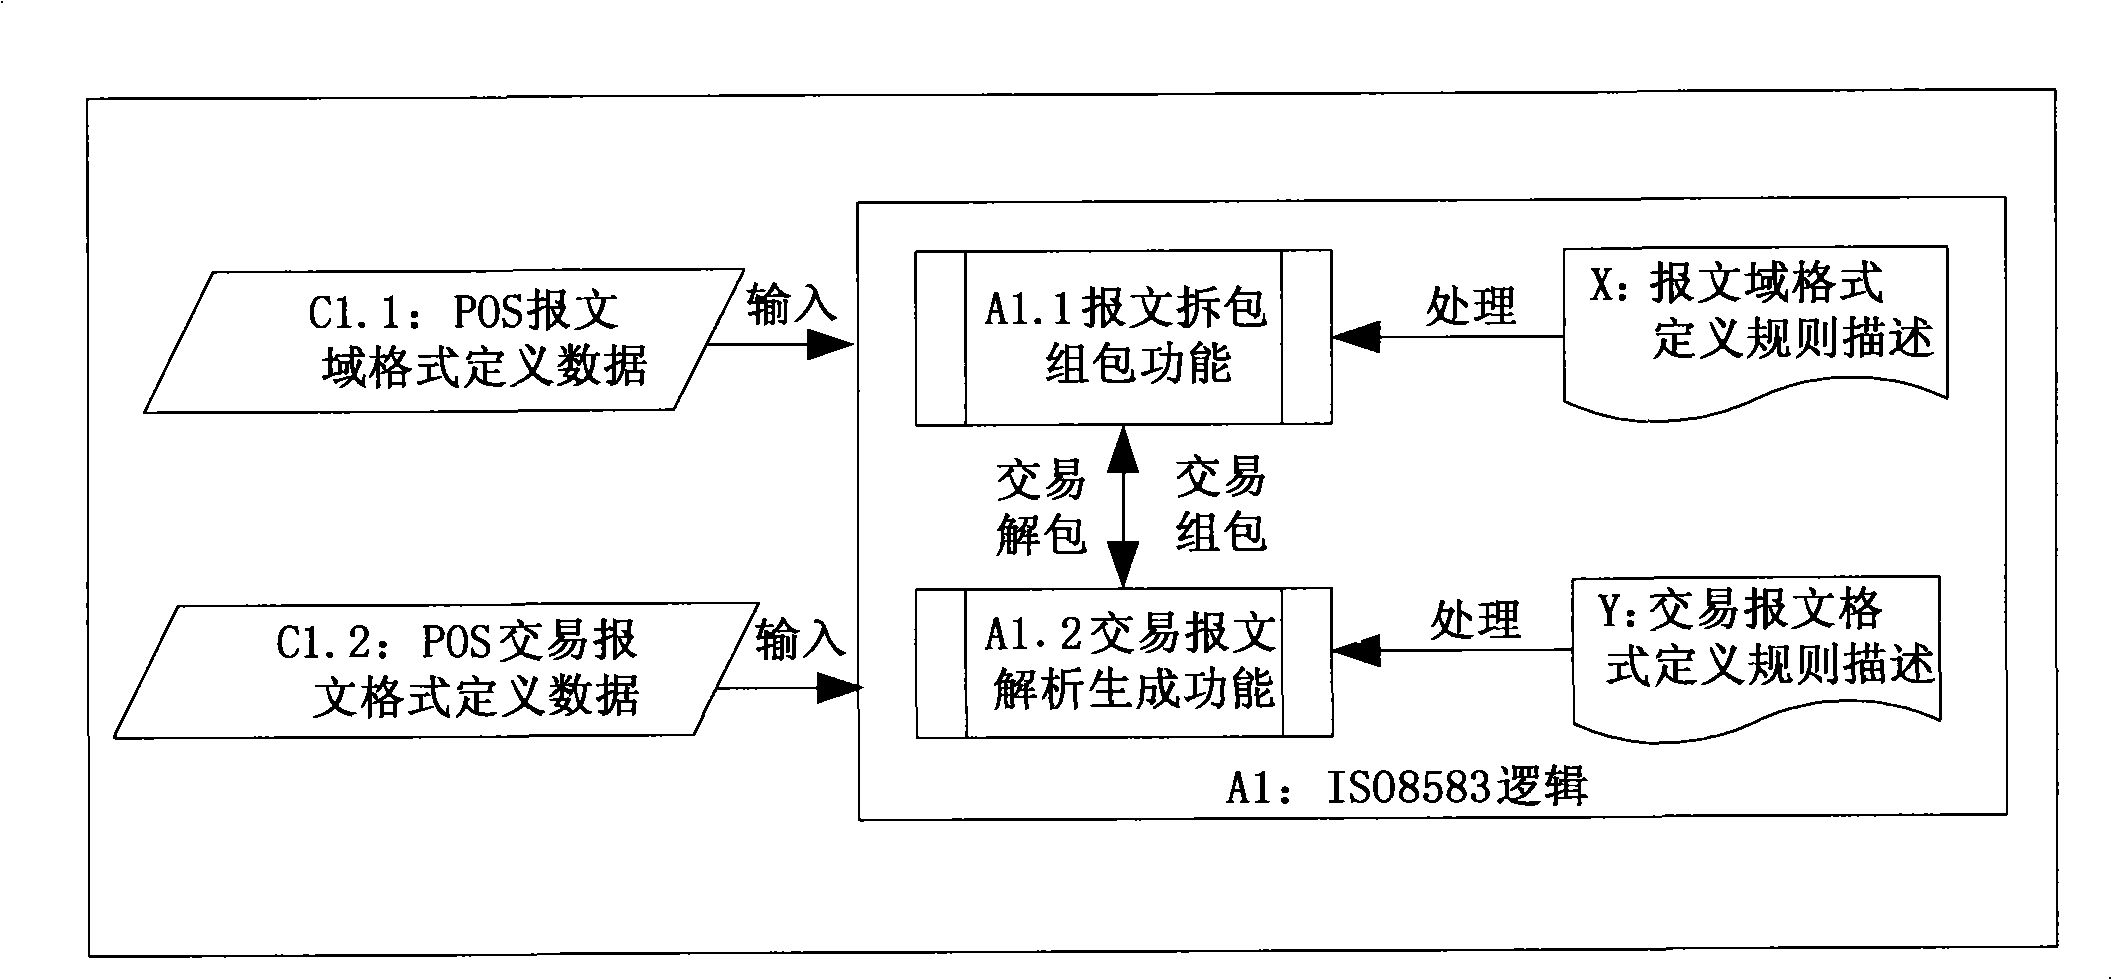 Simulated testing system and method for expanding system by the same system